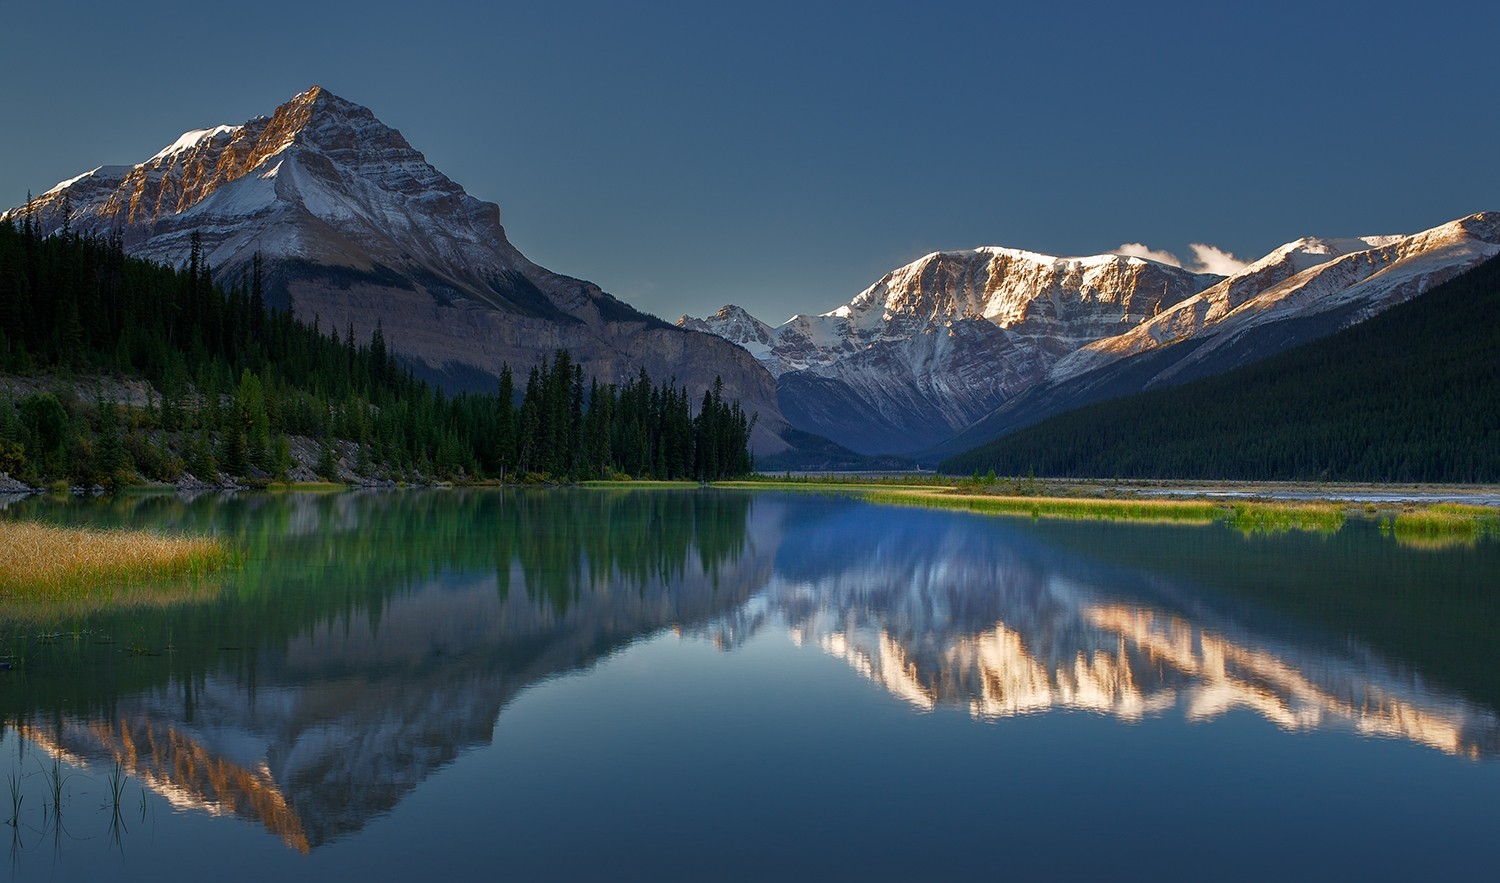 General 1500x883 photography nature landscape morning sunlight Rocky Mountains lake snowy peak reflection forest calm Canada